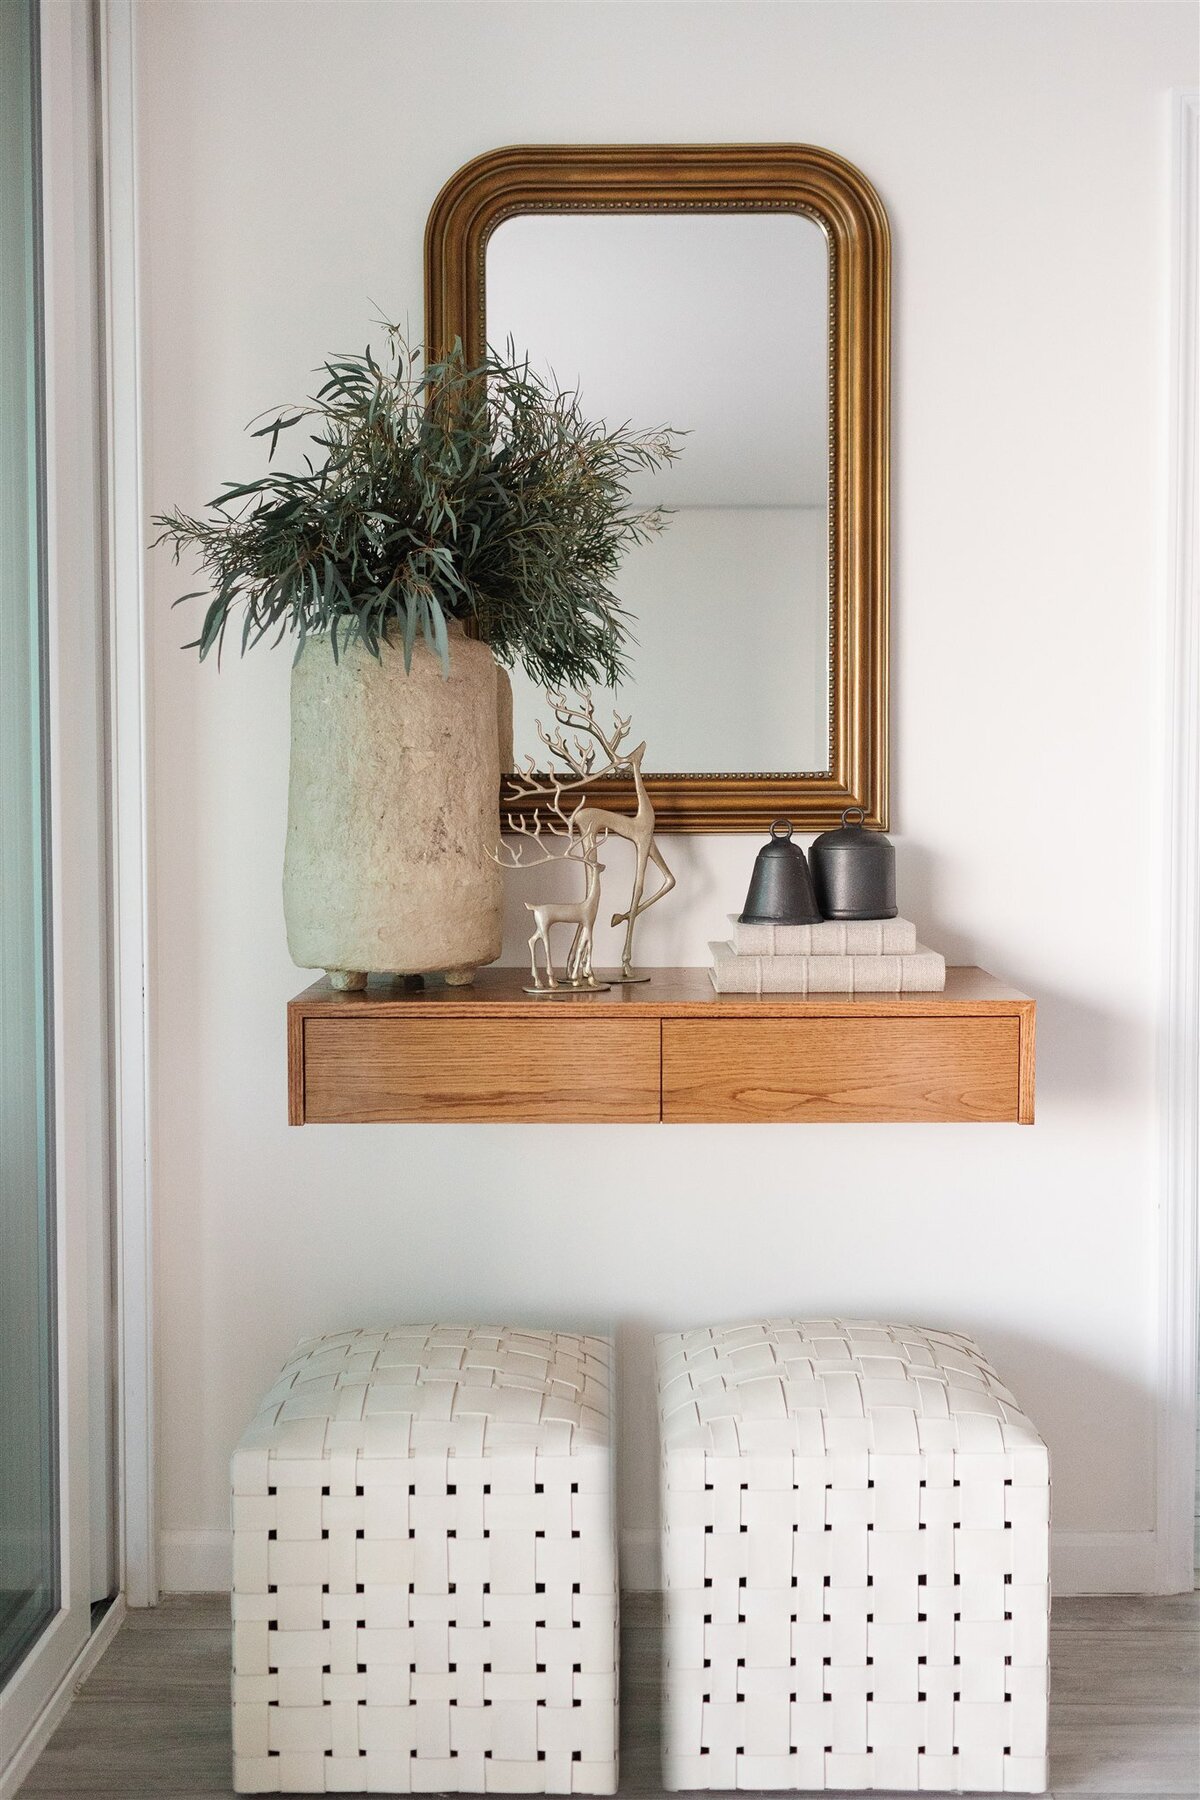 Accents on wooden shelf and gold mirror